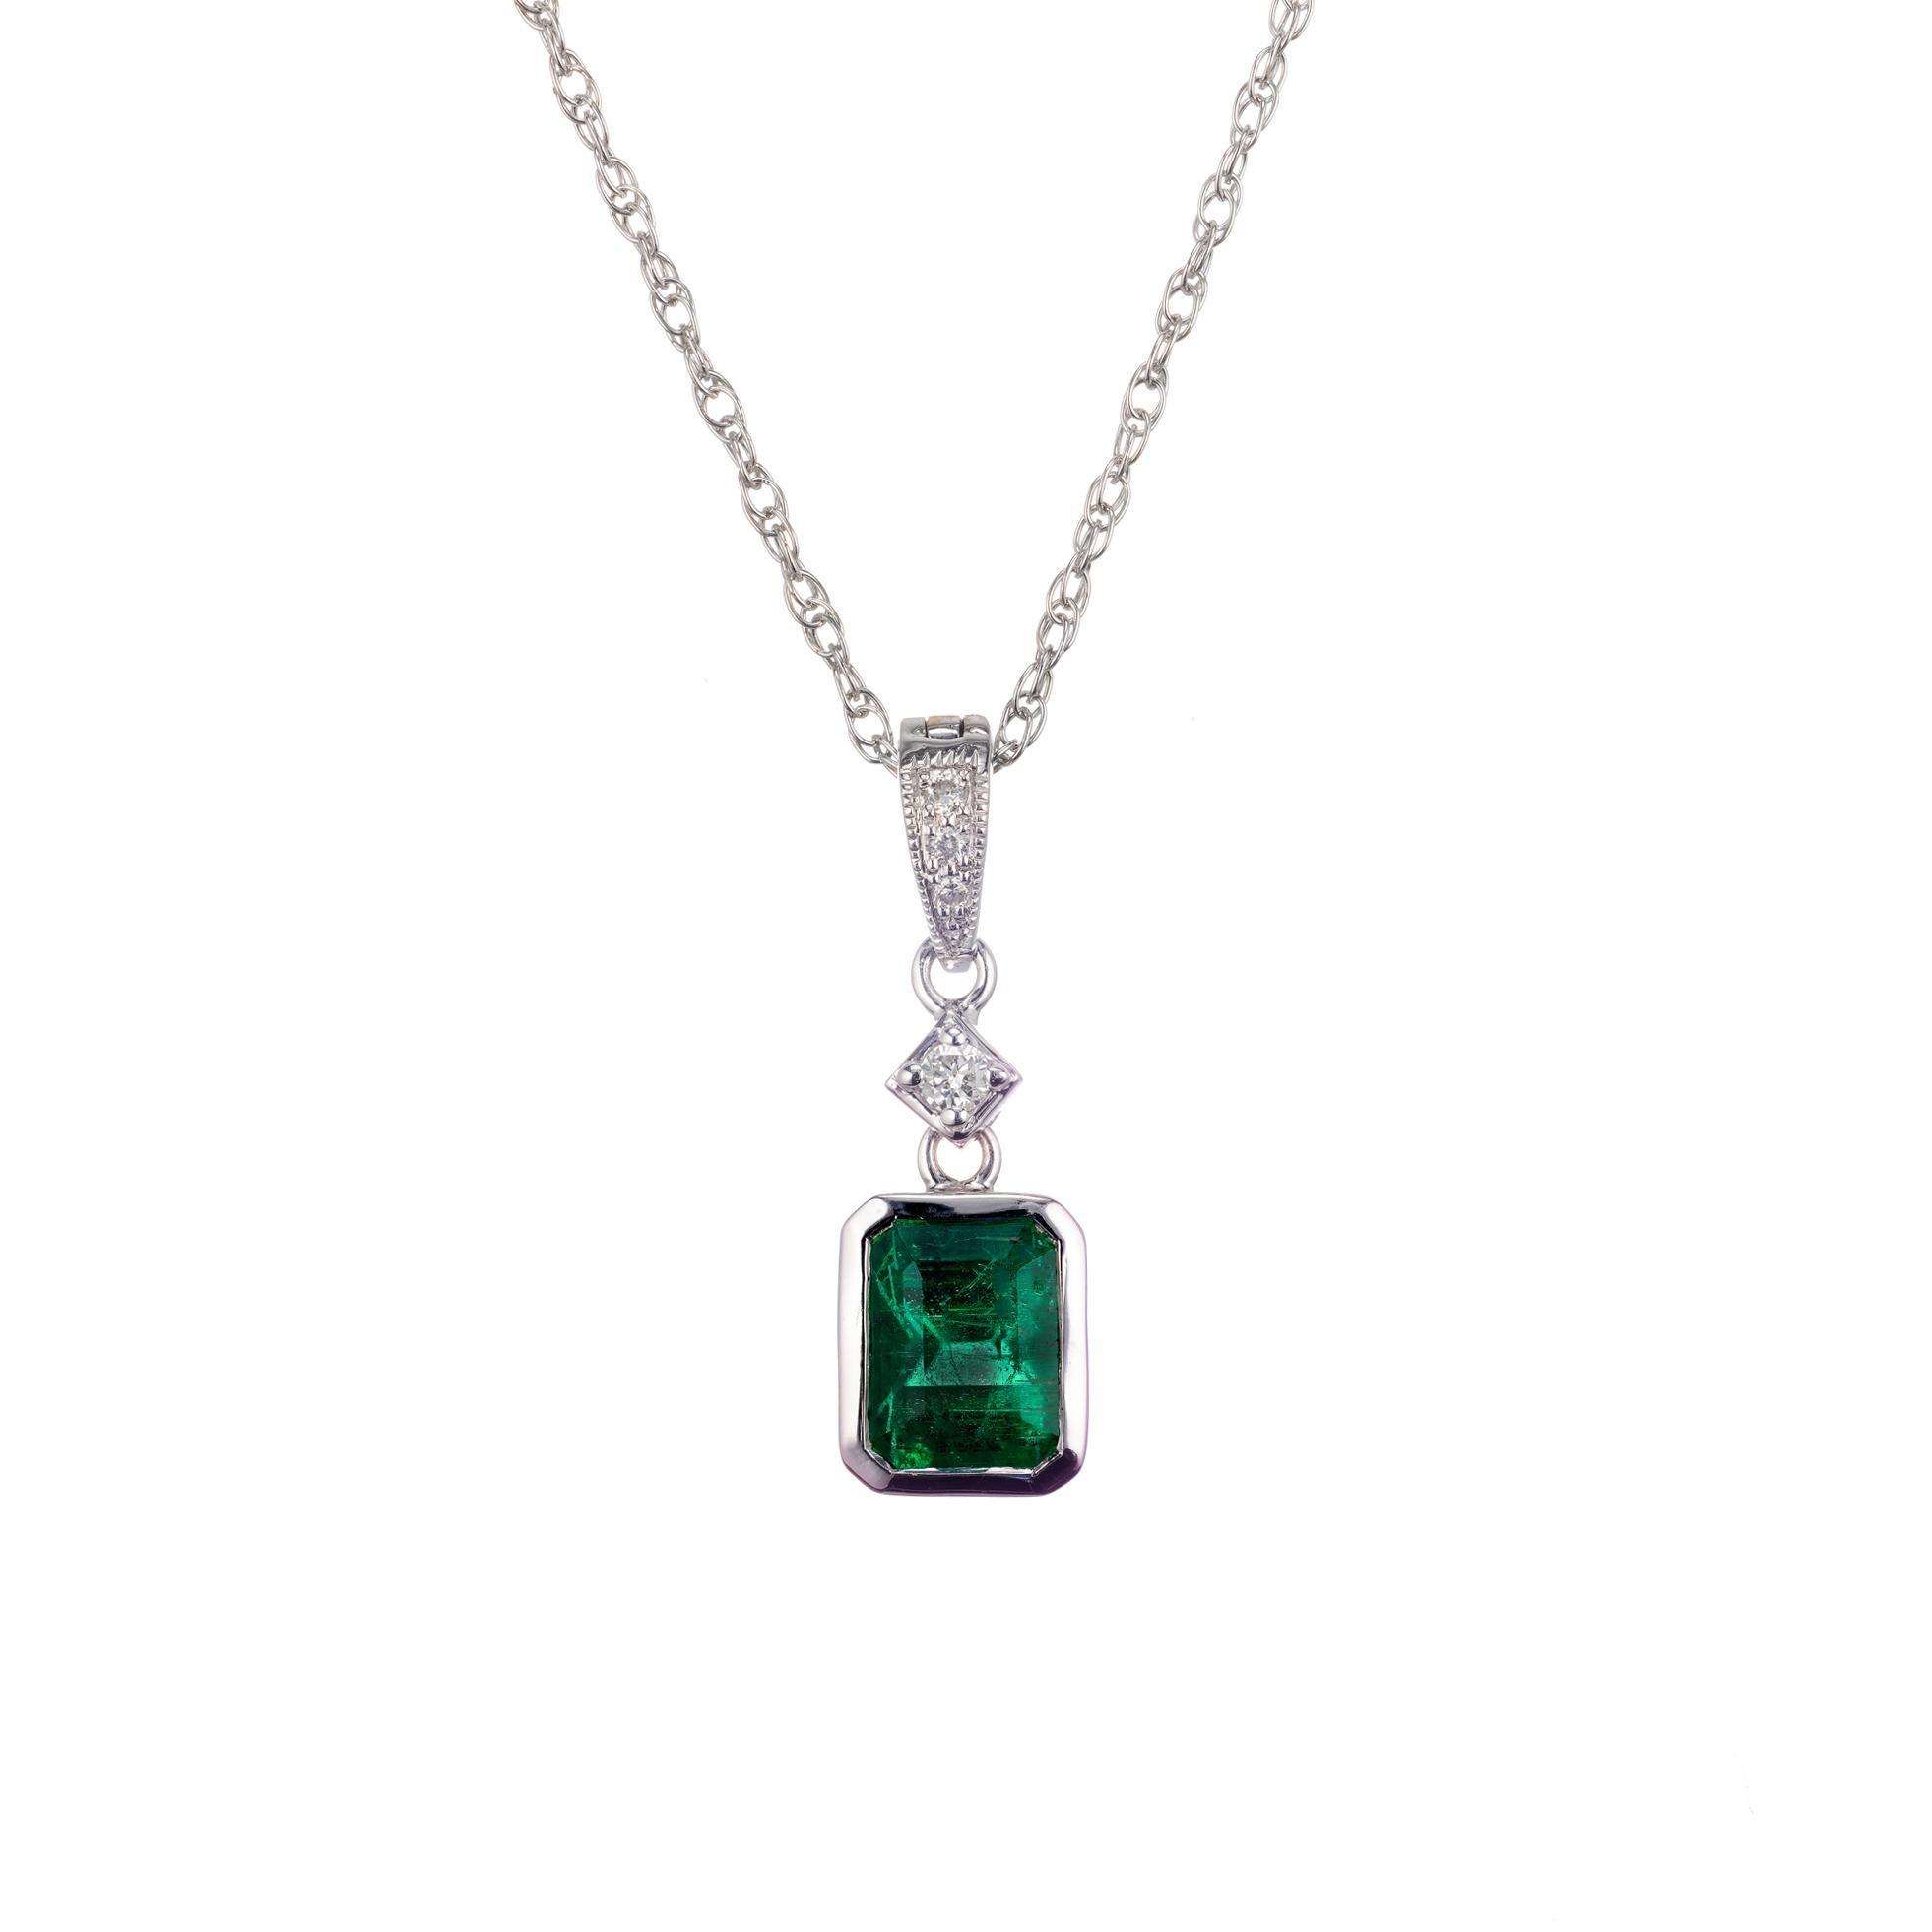 Peter Suchy bright green emerald and diamond pendant necklace. GIA certified natural emerald low level F clarity enhancement. Custom made bezel enhancer pendant with four accent diamonds. 14k white gold 16 inch chain. 

1 step cut octagon green MI